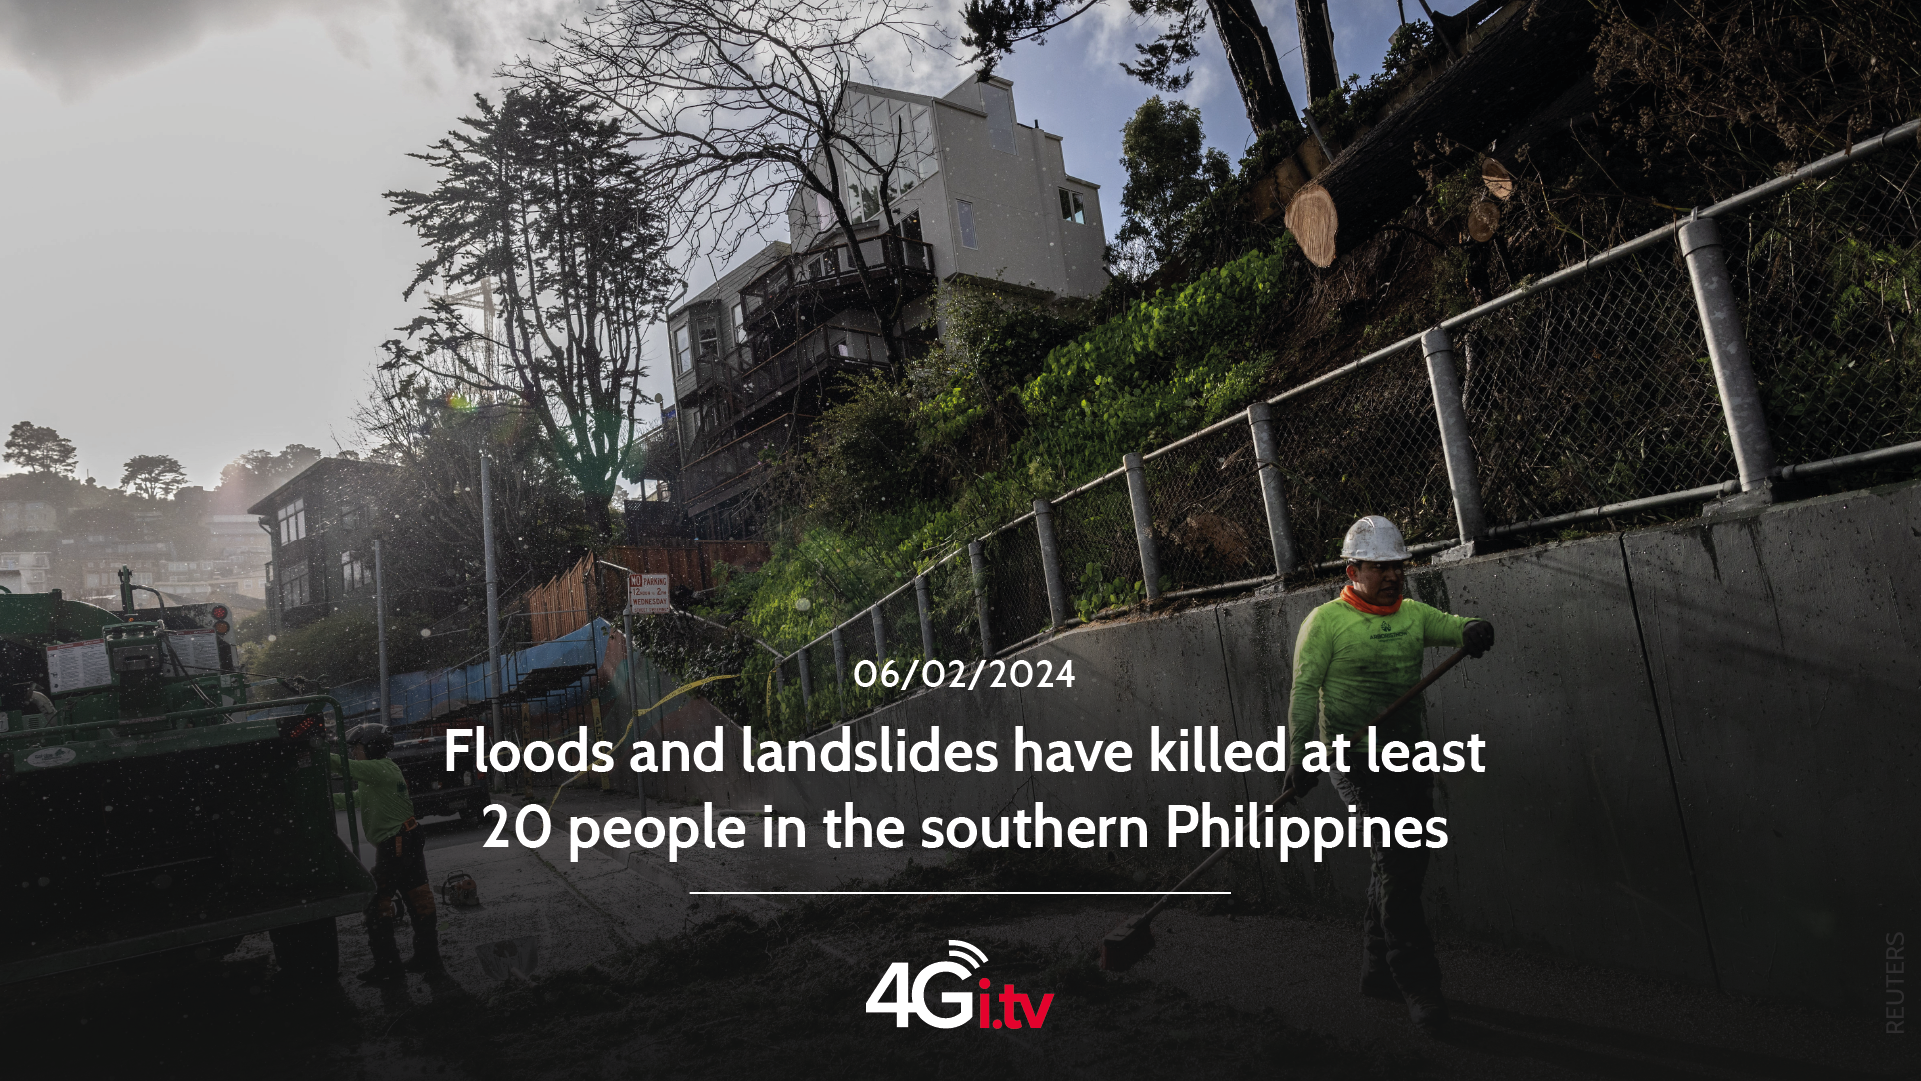 Подробнее о статье Floods and landslides have killed at least 20 people in the southern Philippines